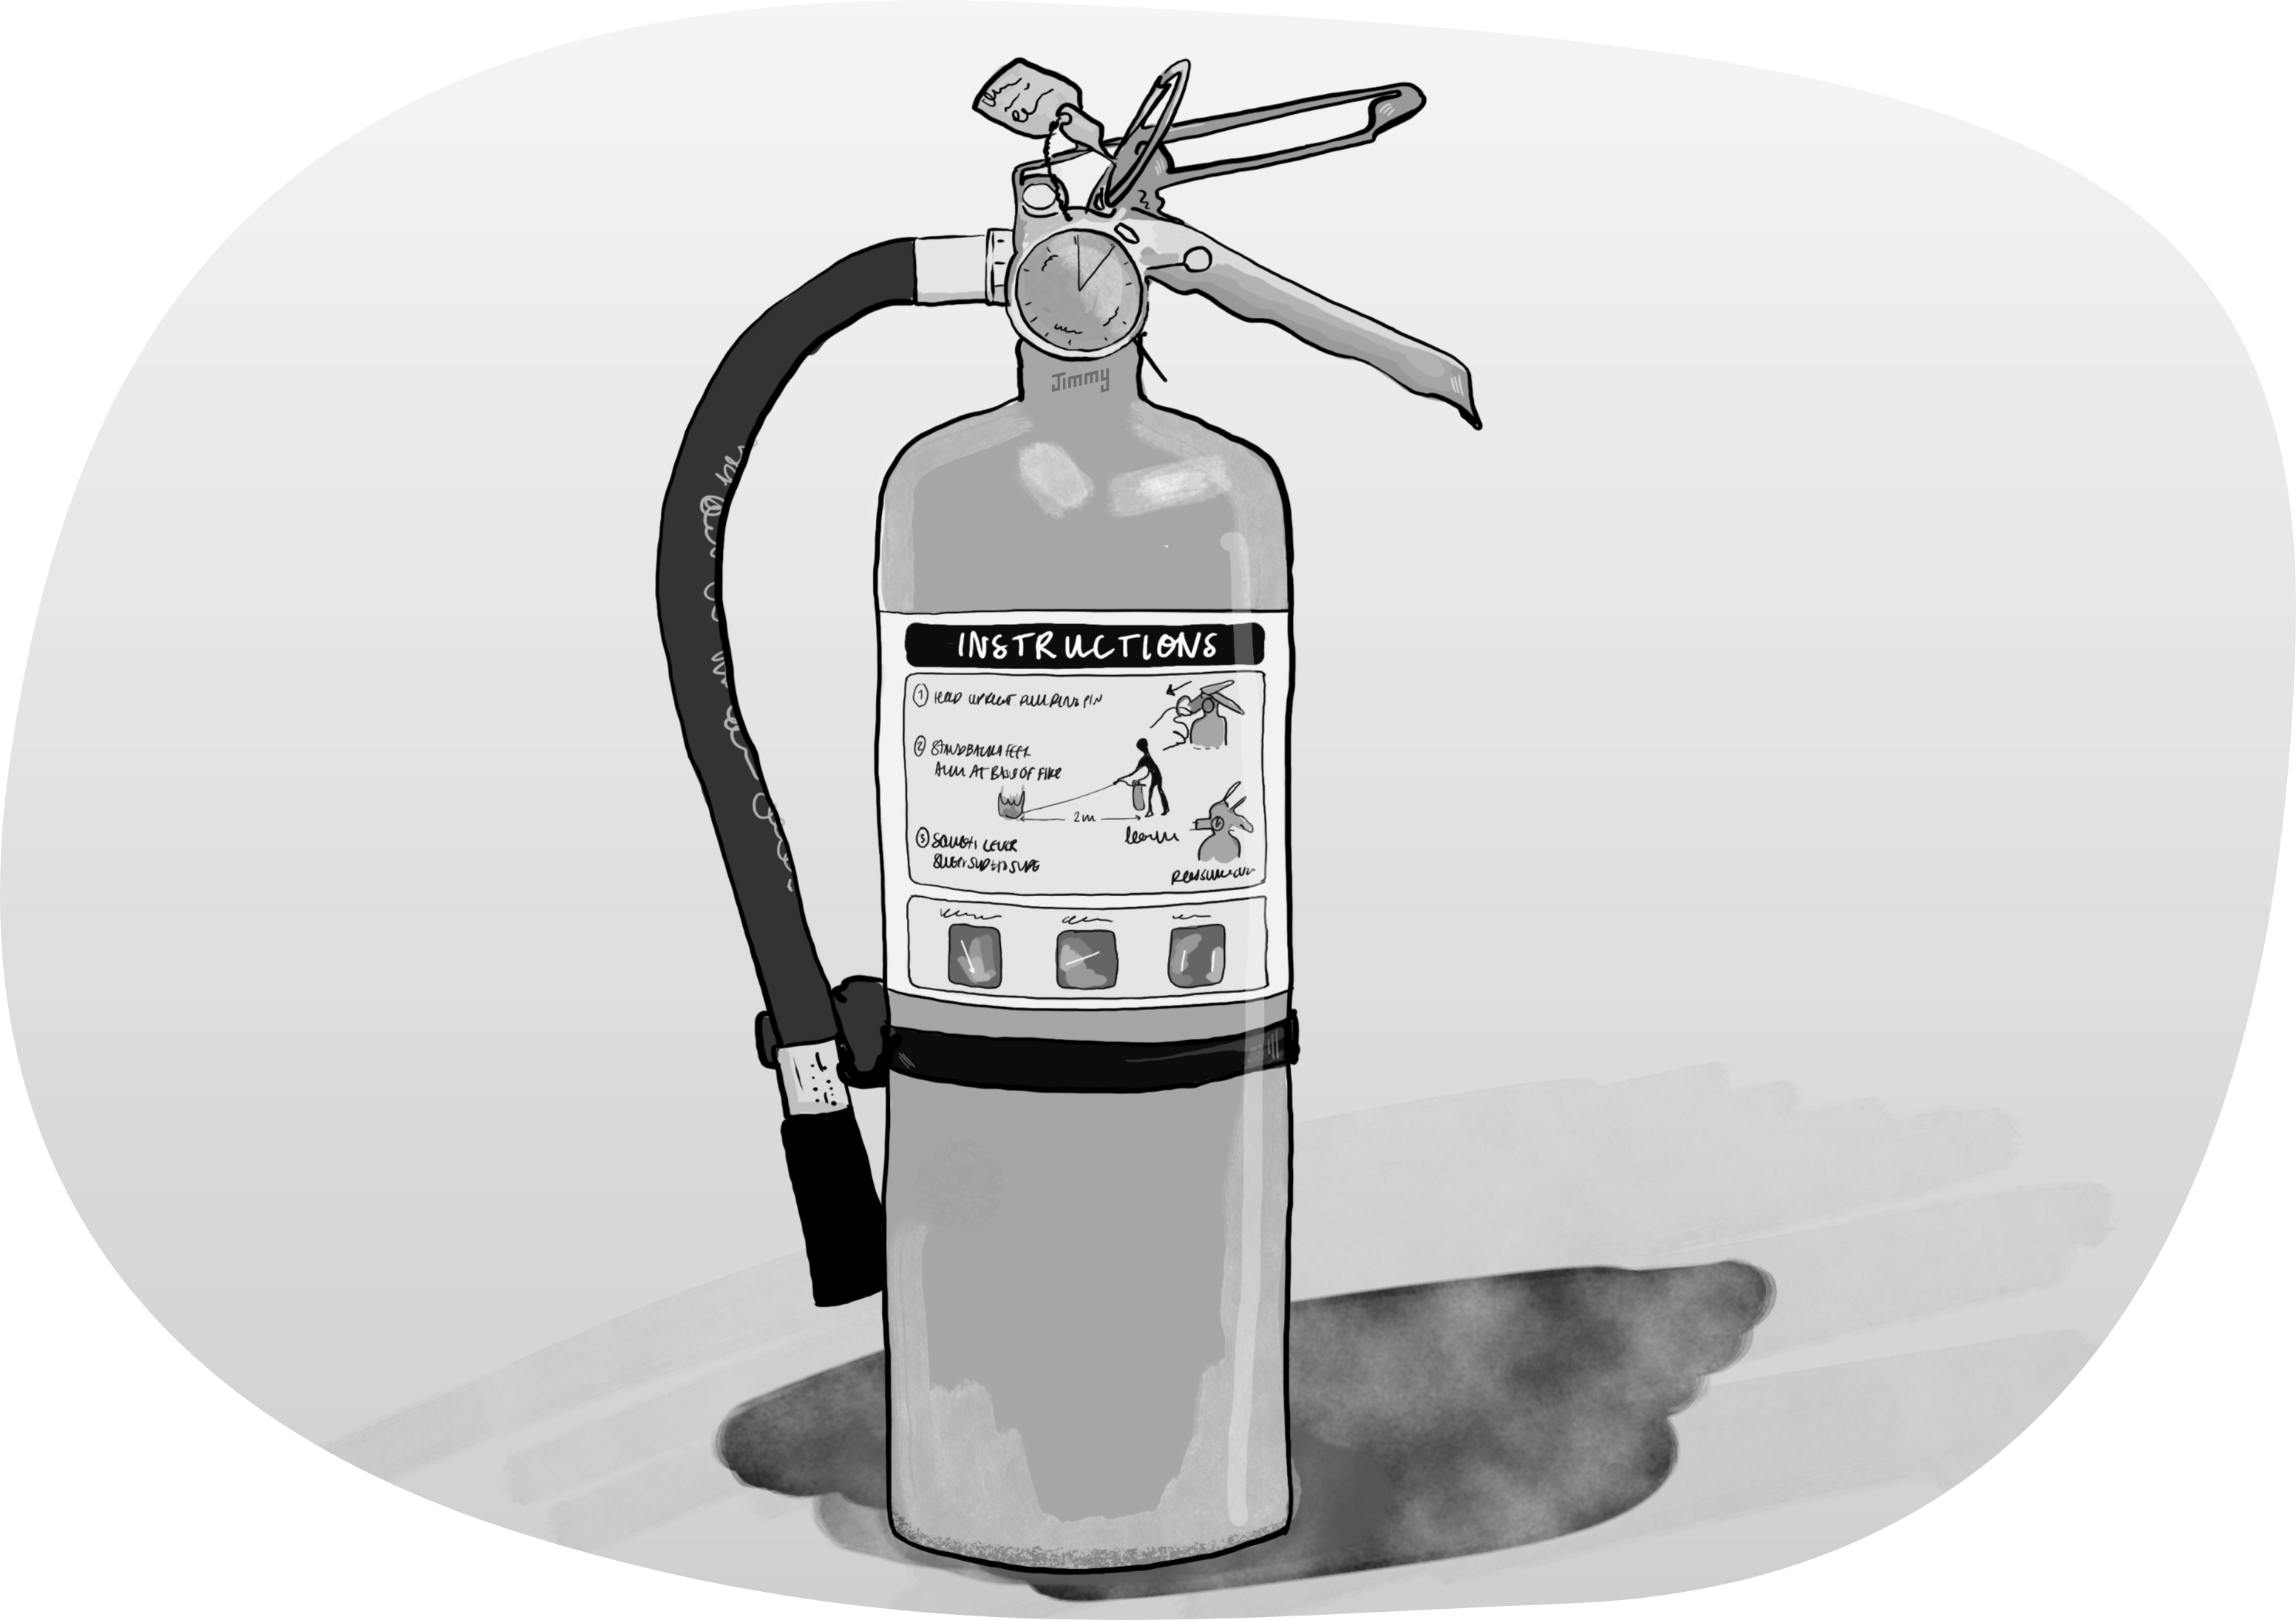 Illustration of a fire extinguisher.